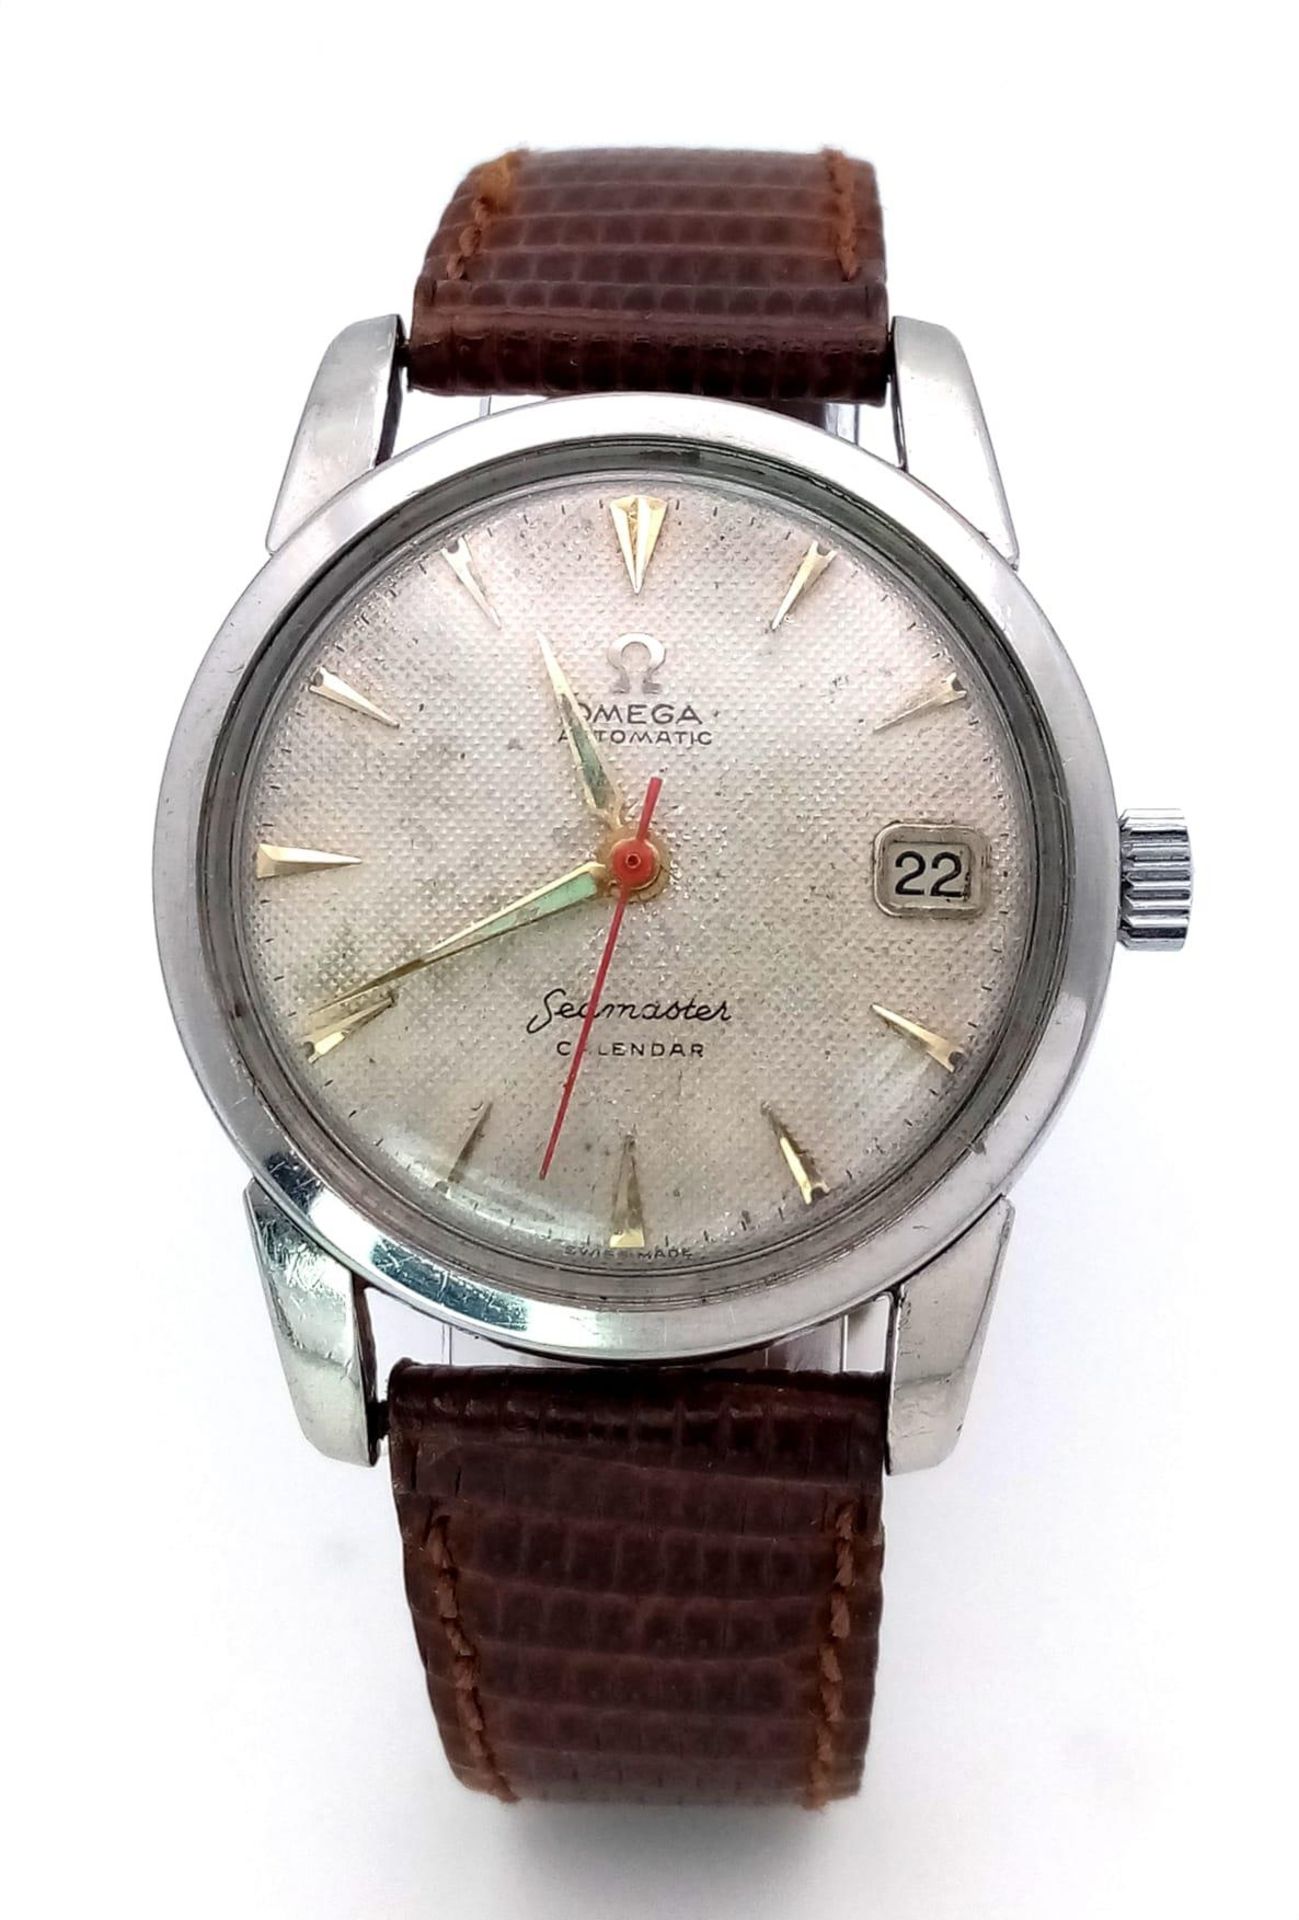 A Vintage Omega Seamaster Calendar Gents Watch. Brown leather strap. Stainless steel case - 33mm. - Image 3 of 8